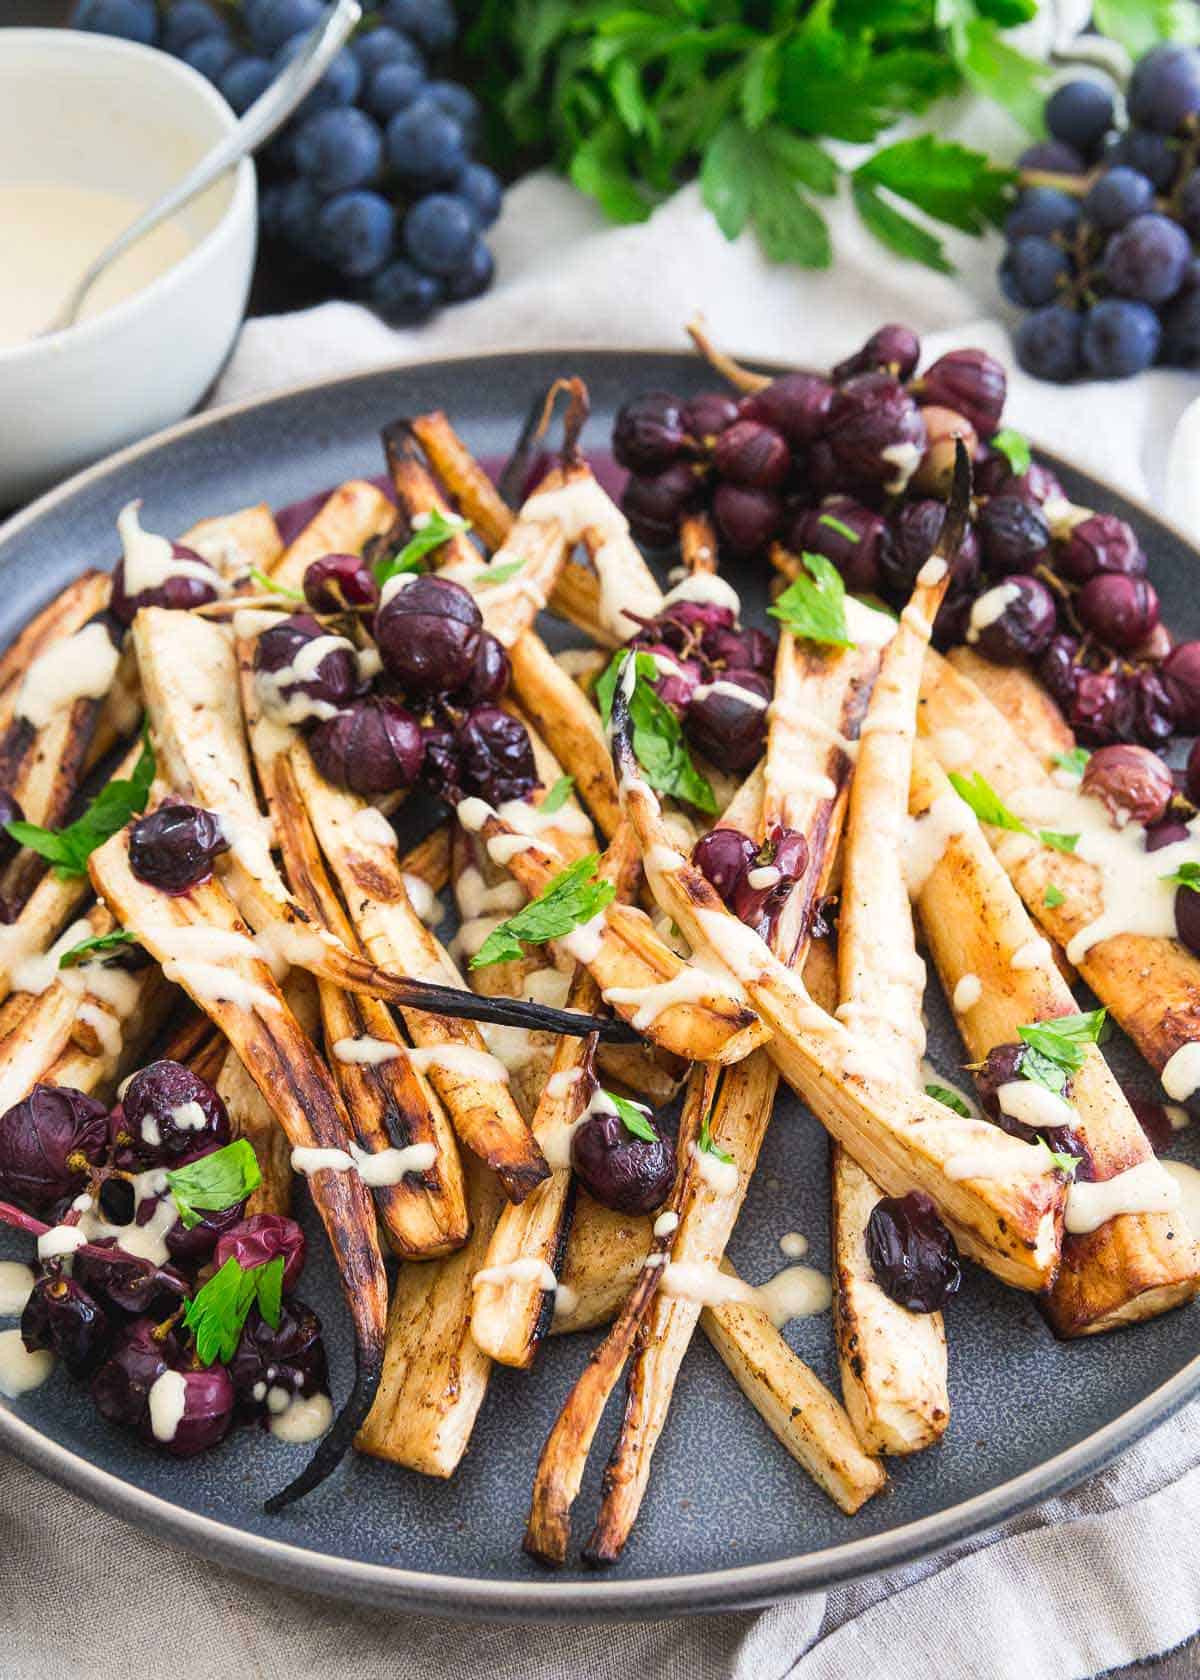 Roasted parsnips and concord grapes with cinnamon, brown sugar and a sweet hummus dressing.